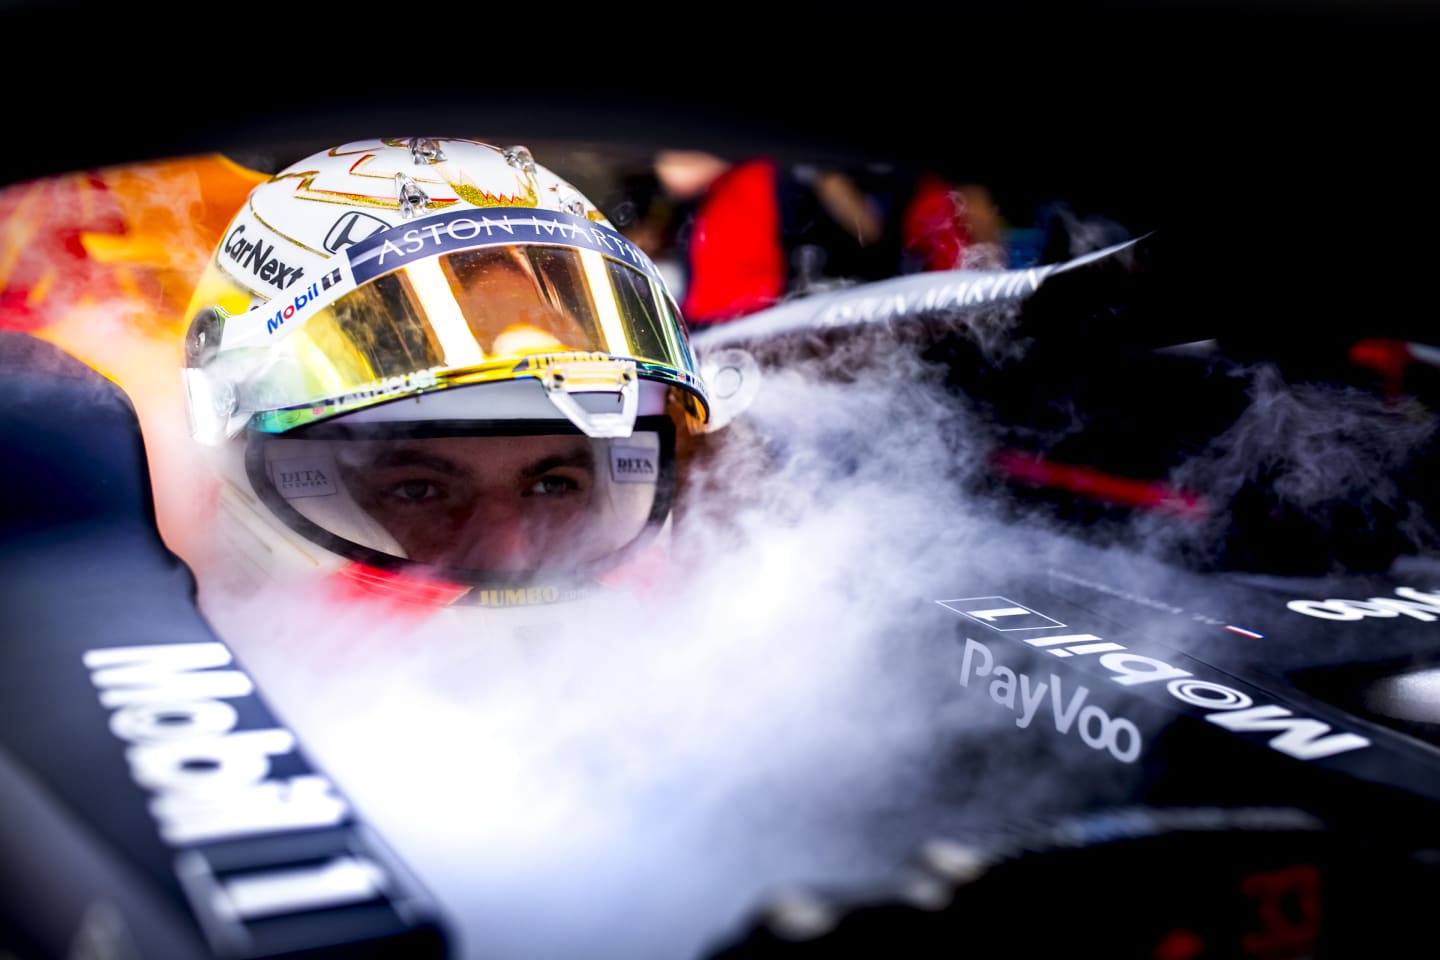 BARCELONA, SPAIN - AUGUST 14: Max Verstappen of Netherlands and Red Bull Racing prepares to drive